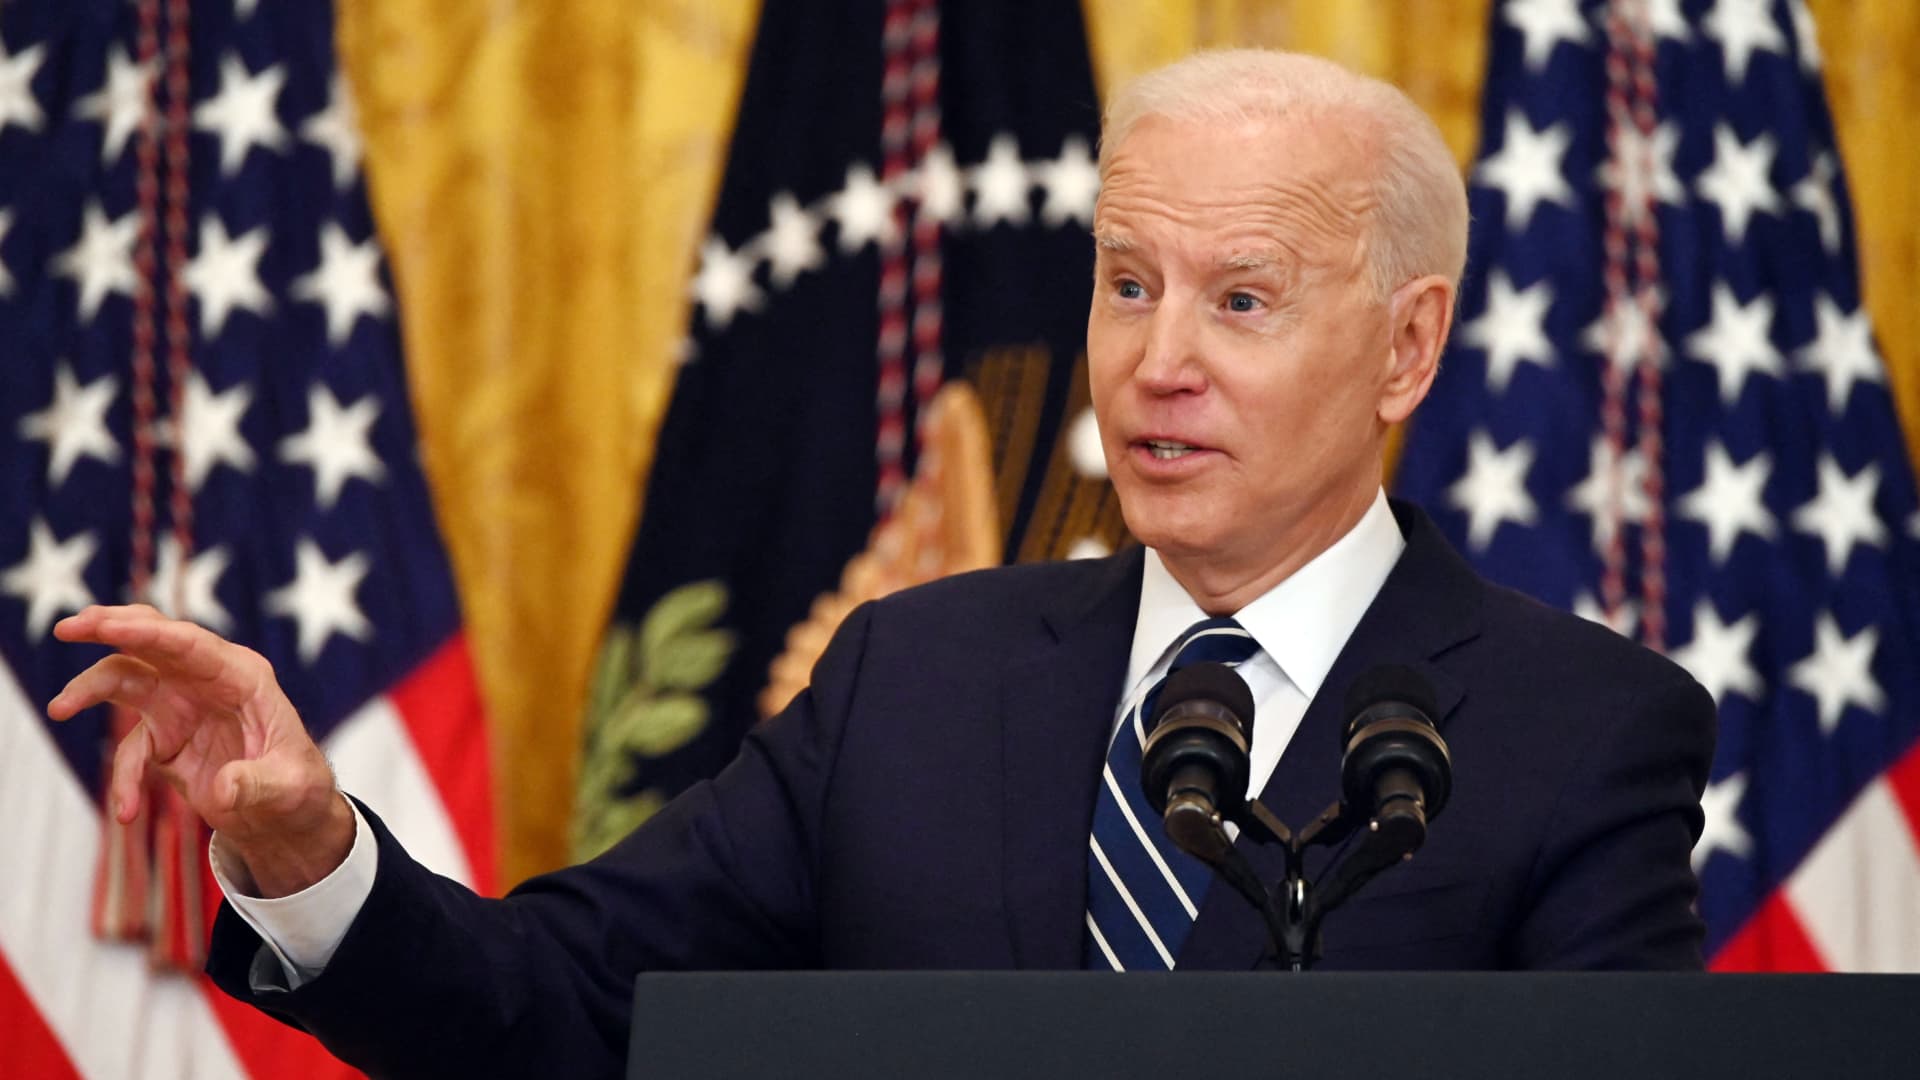 President Joe Biden answers a question during his first press briefing in the East Room of the White House in Washington, DC, on March 25, 2021.